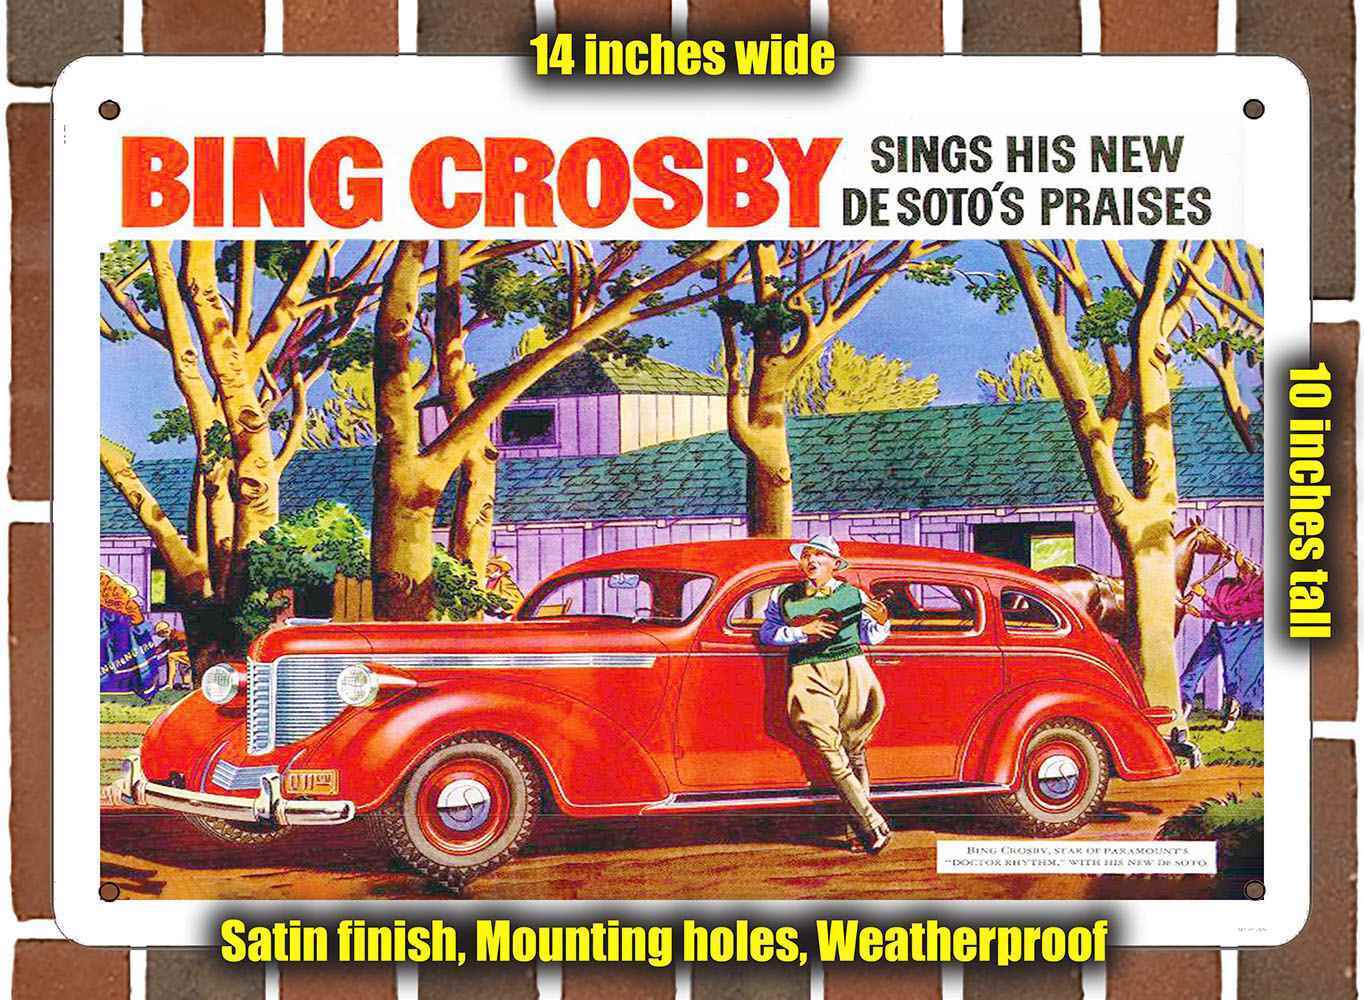 Metal Sign - 1938 Bing Crosby for De Soto- 10x14 inches